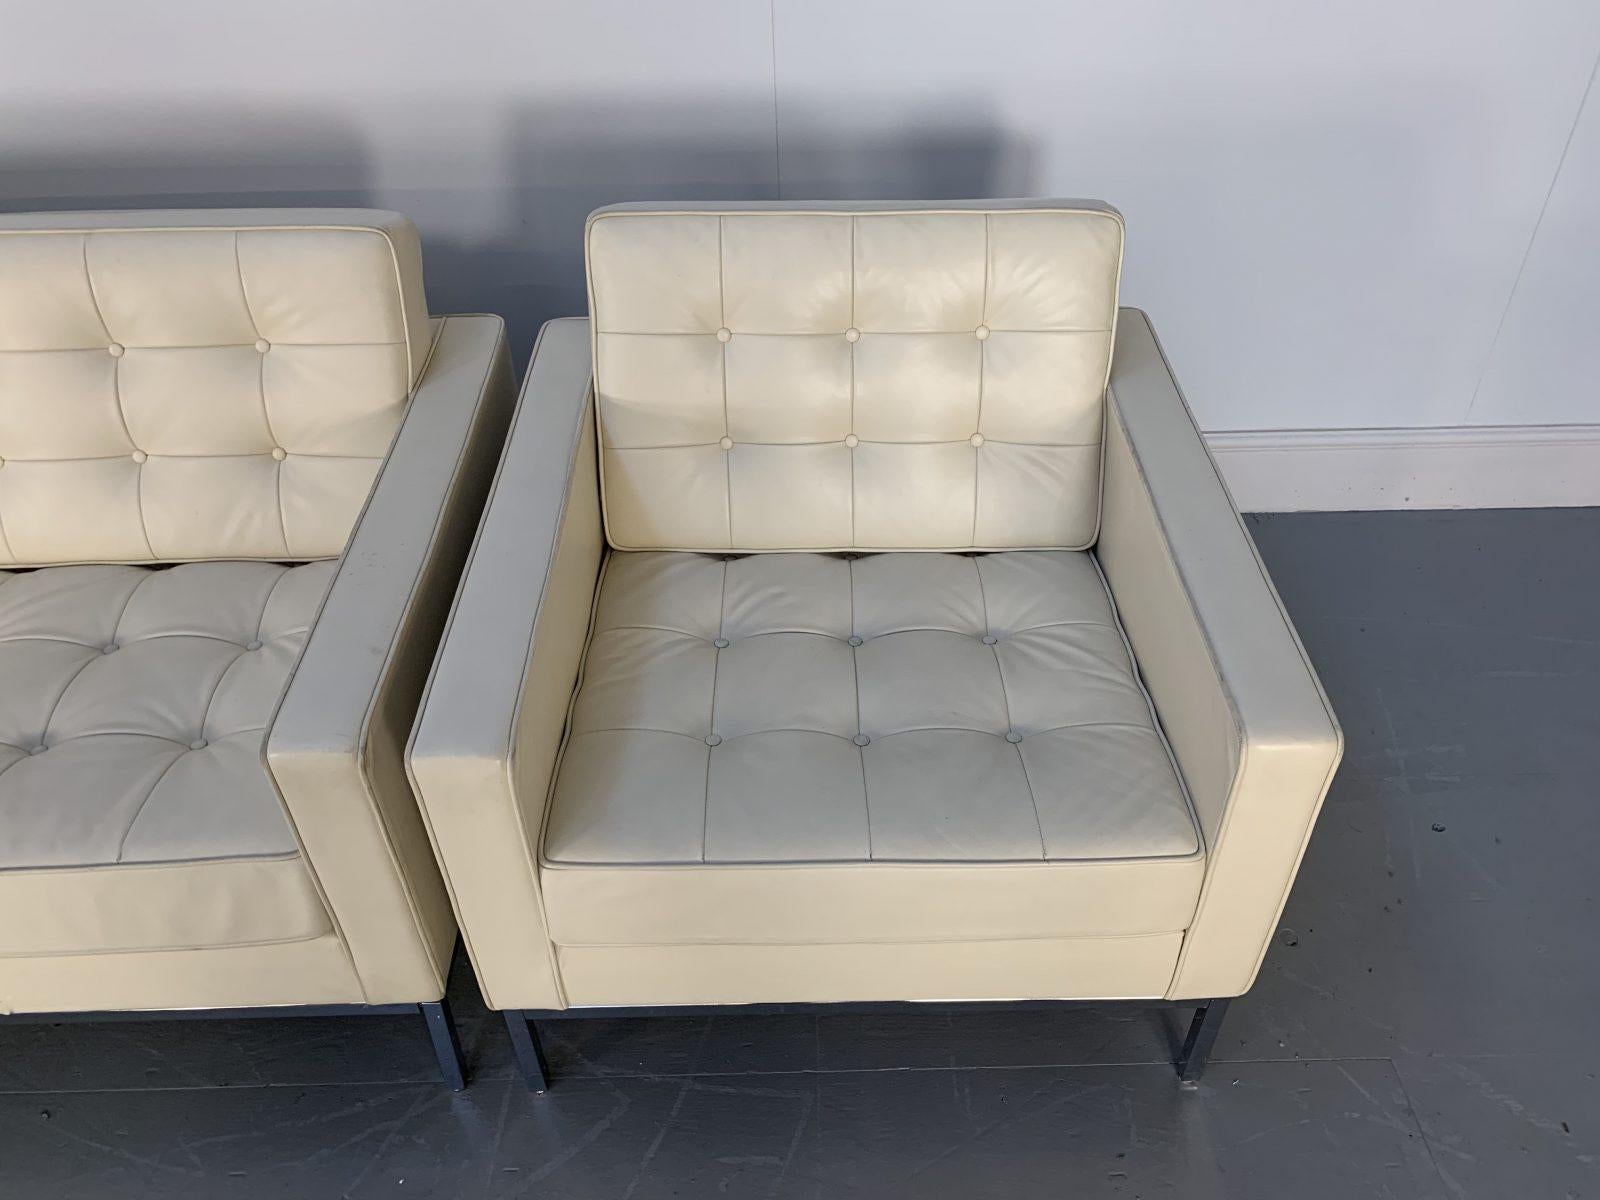 Knoll Studio “Florence Knoll Relax” Sofa & 2 Armchair Suite in “Volo” Leather For Sale 2